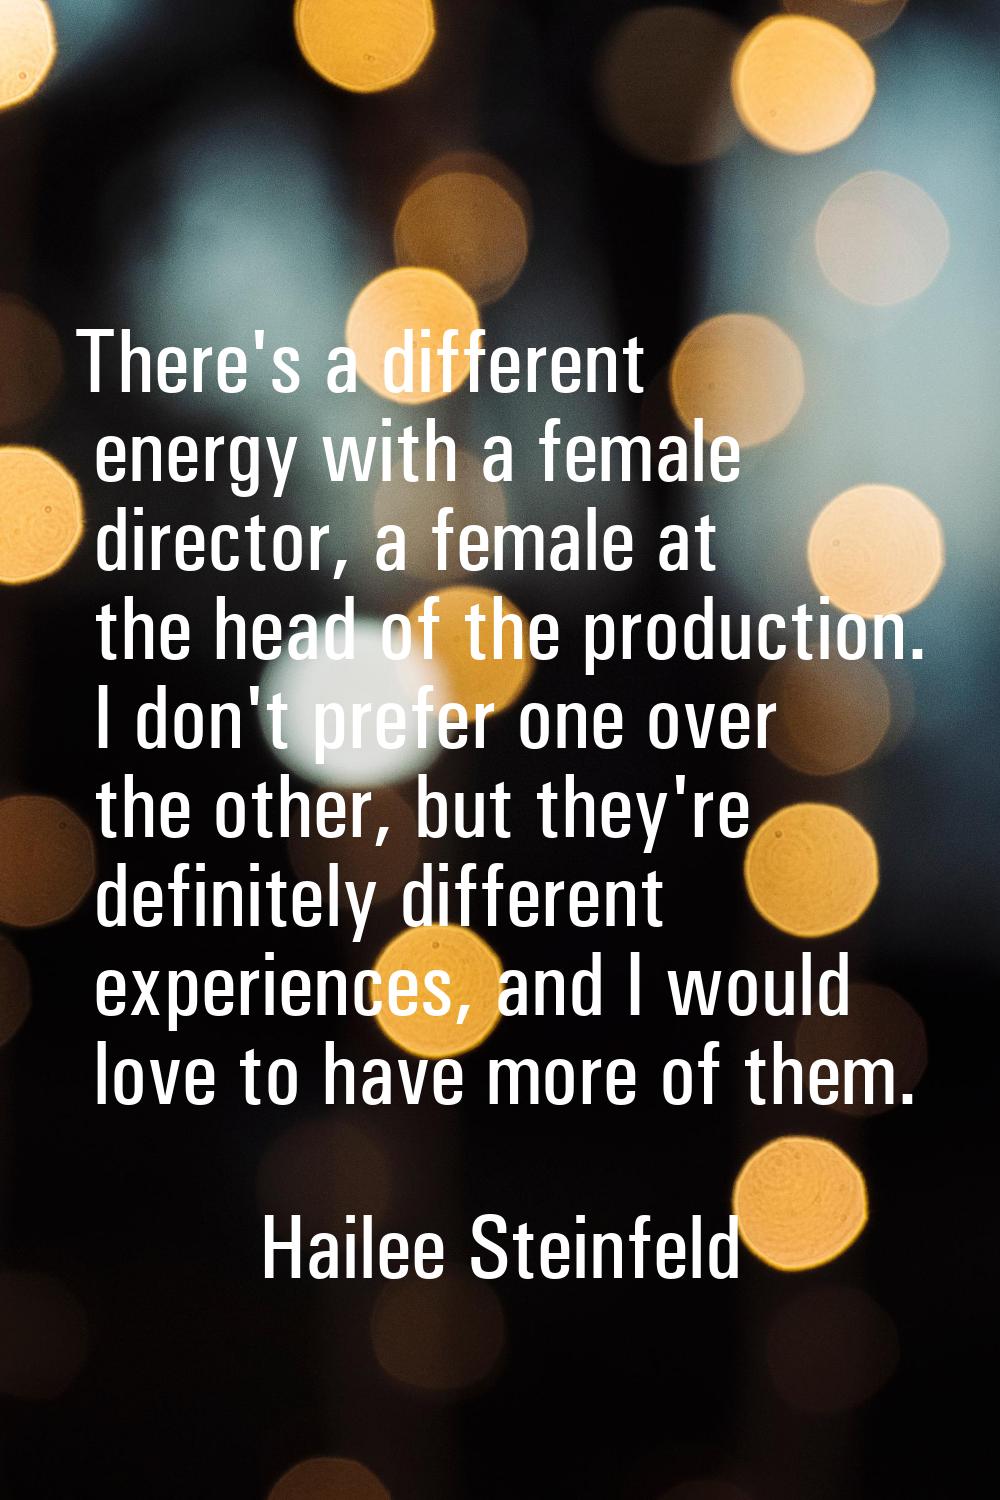 There's a different energy with a female director, a female at the head of the production. I don't 